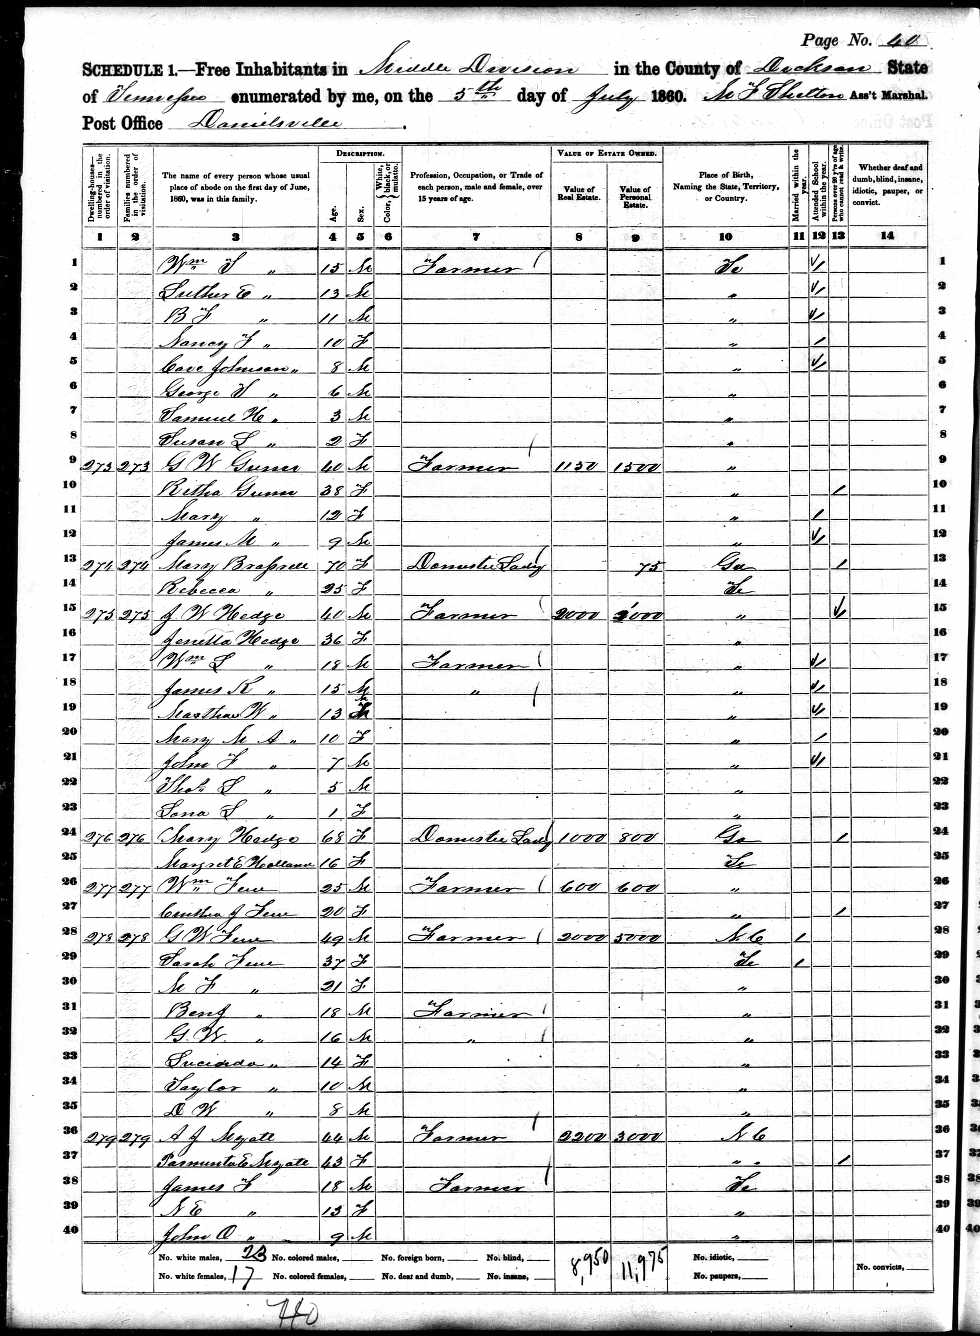 George W. Gunn and wife Retha Brazzell, 1860 Dickson County, Tennessee, census